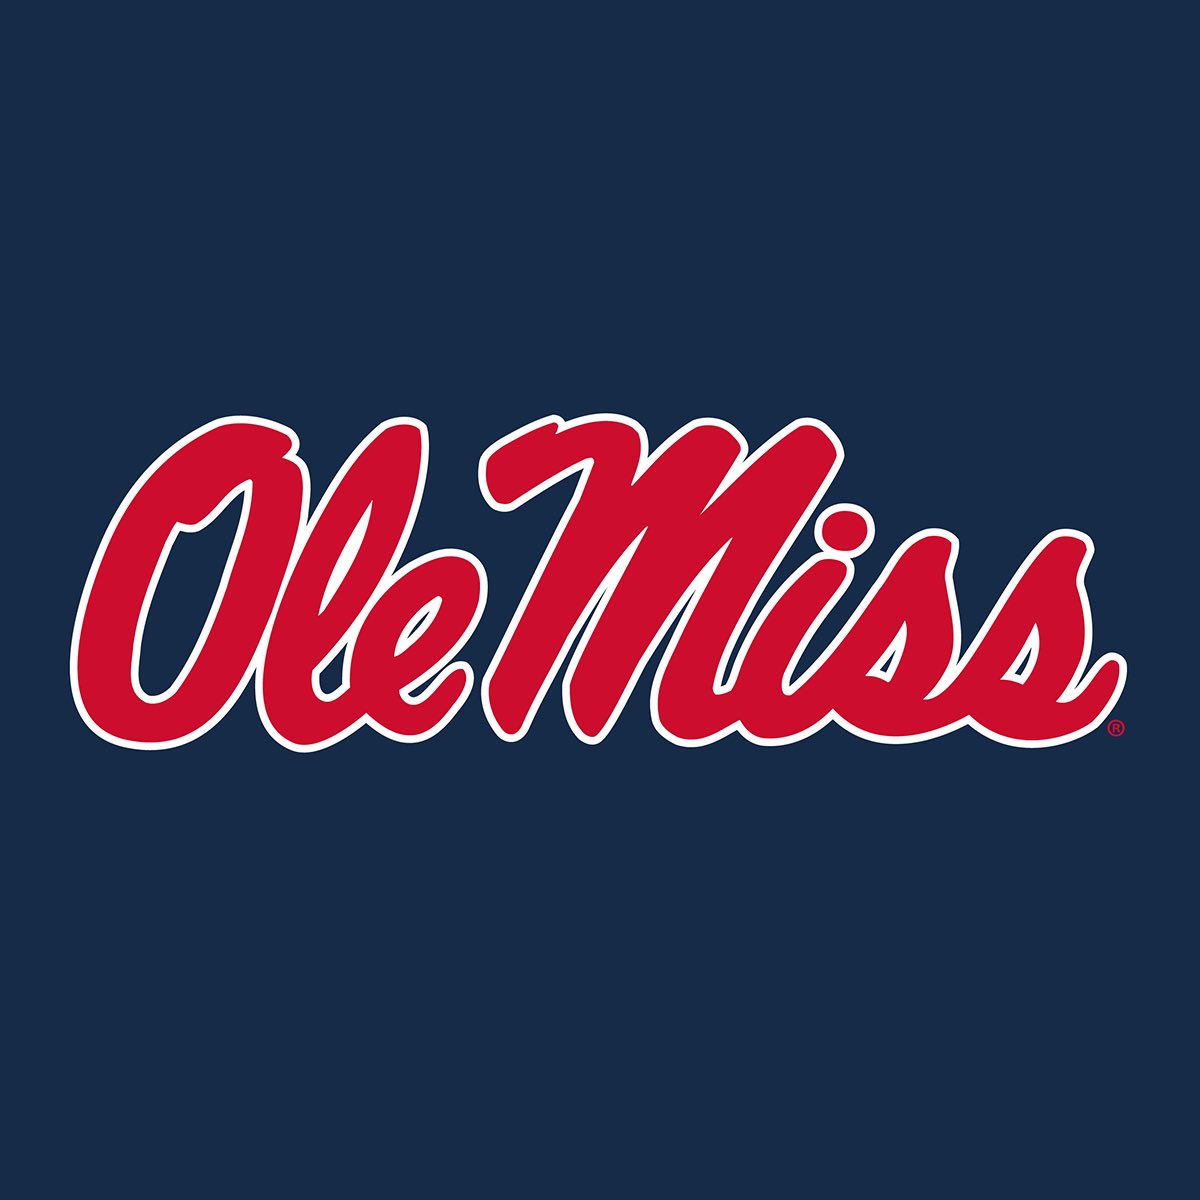 Another blessing from today, I’m honored to receive an offer from the University of Mississippi ,after speaking with @wesnab4646 @OleMissFB @OleMissSports 🔴🔵🦈@CoachEdwards10 @HoCoCoachGrace @CoachDollar @CoachSing18 @CoachEarly24 @Ztaisler @CoachMont14